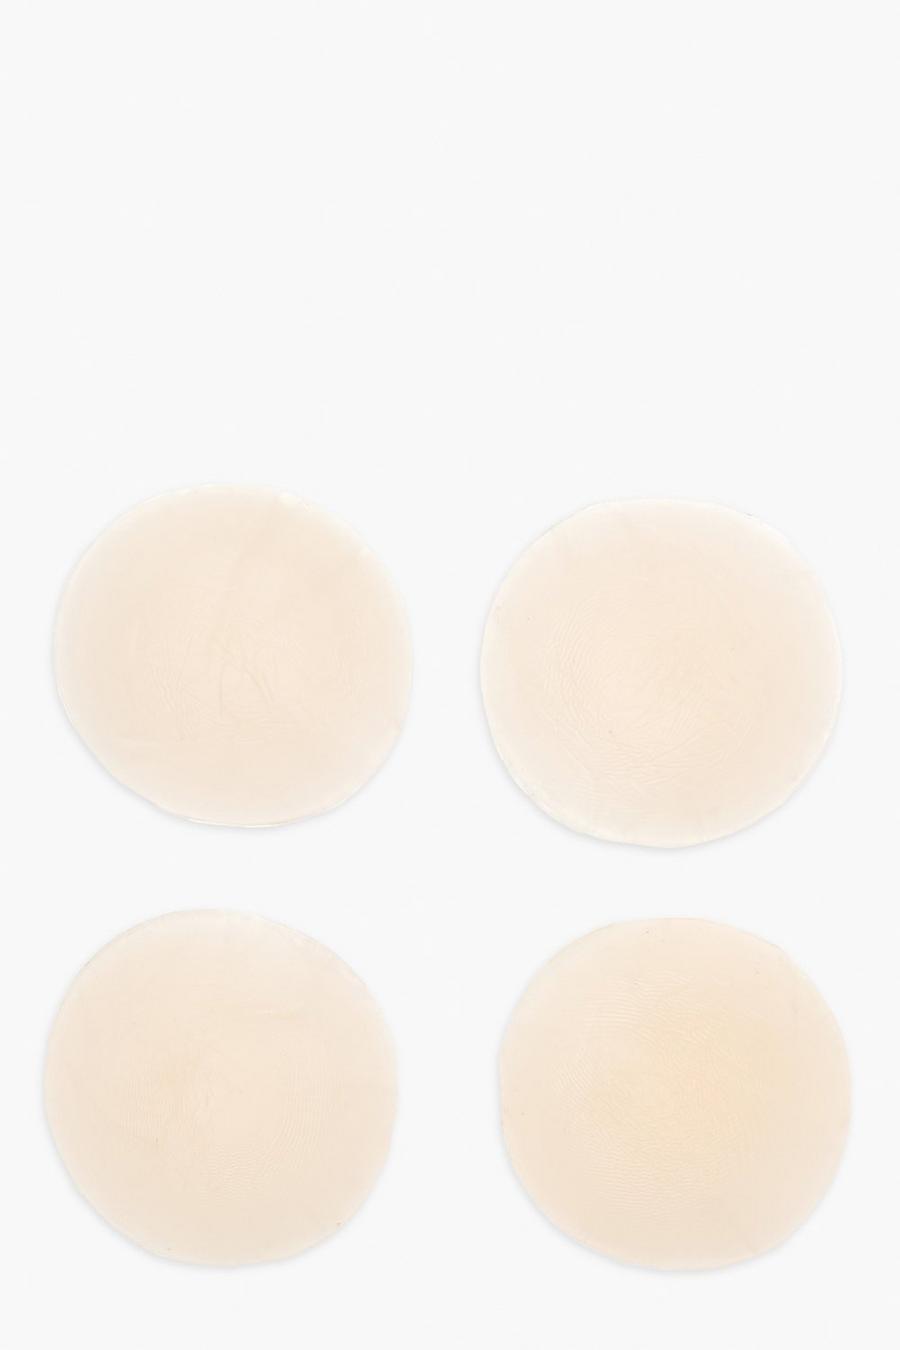 Boohoo Beauty - Copricapezzoli in silicone - set di 2, Natural beige image number 1